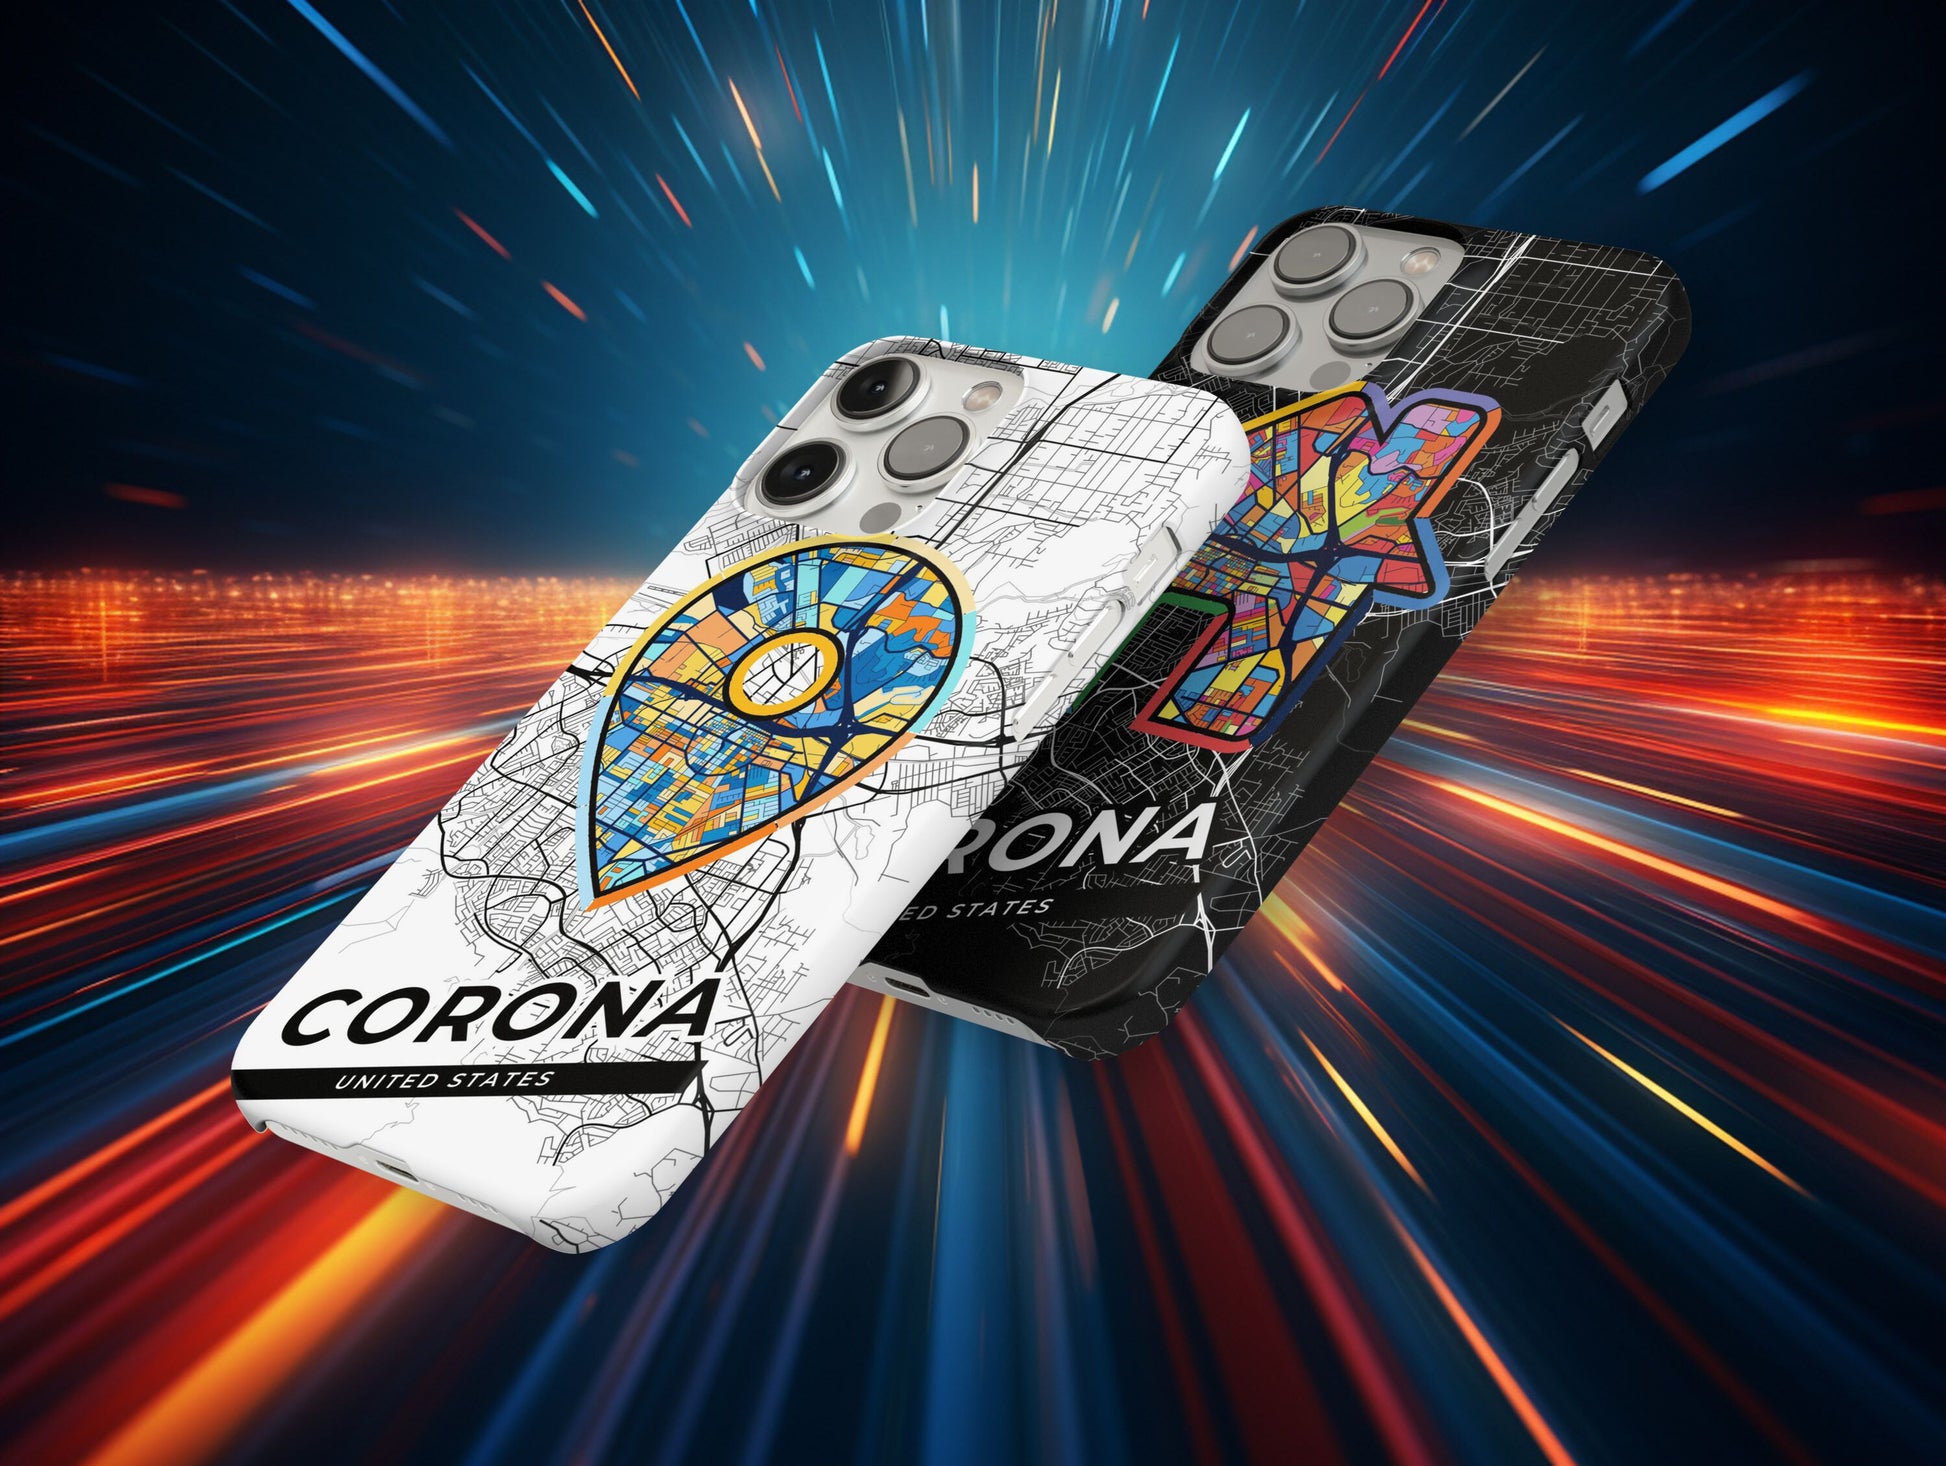 Corona California slim phone case with colorful icon. Birthday, wedding or housewarming gift. Couple match cases.